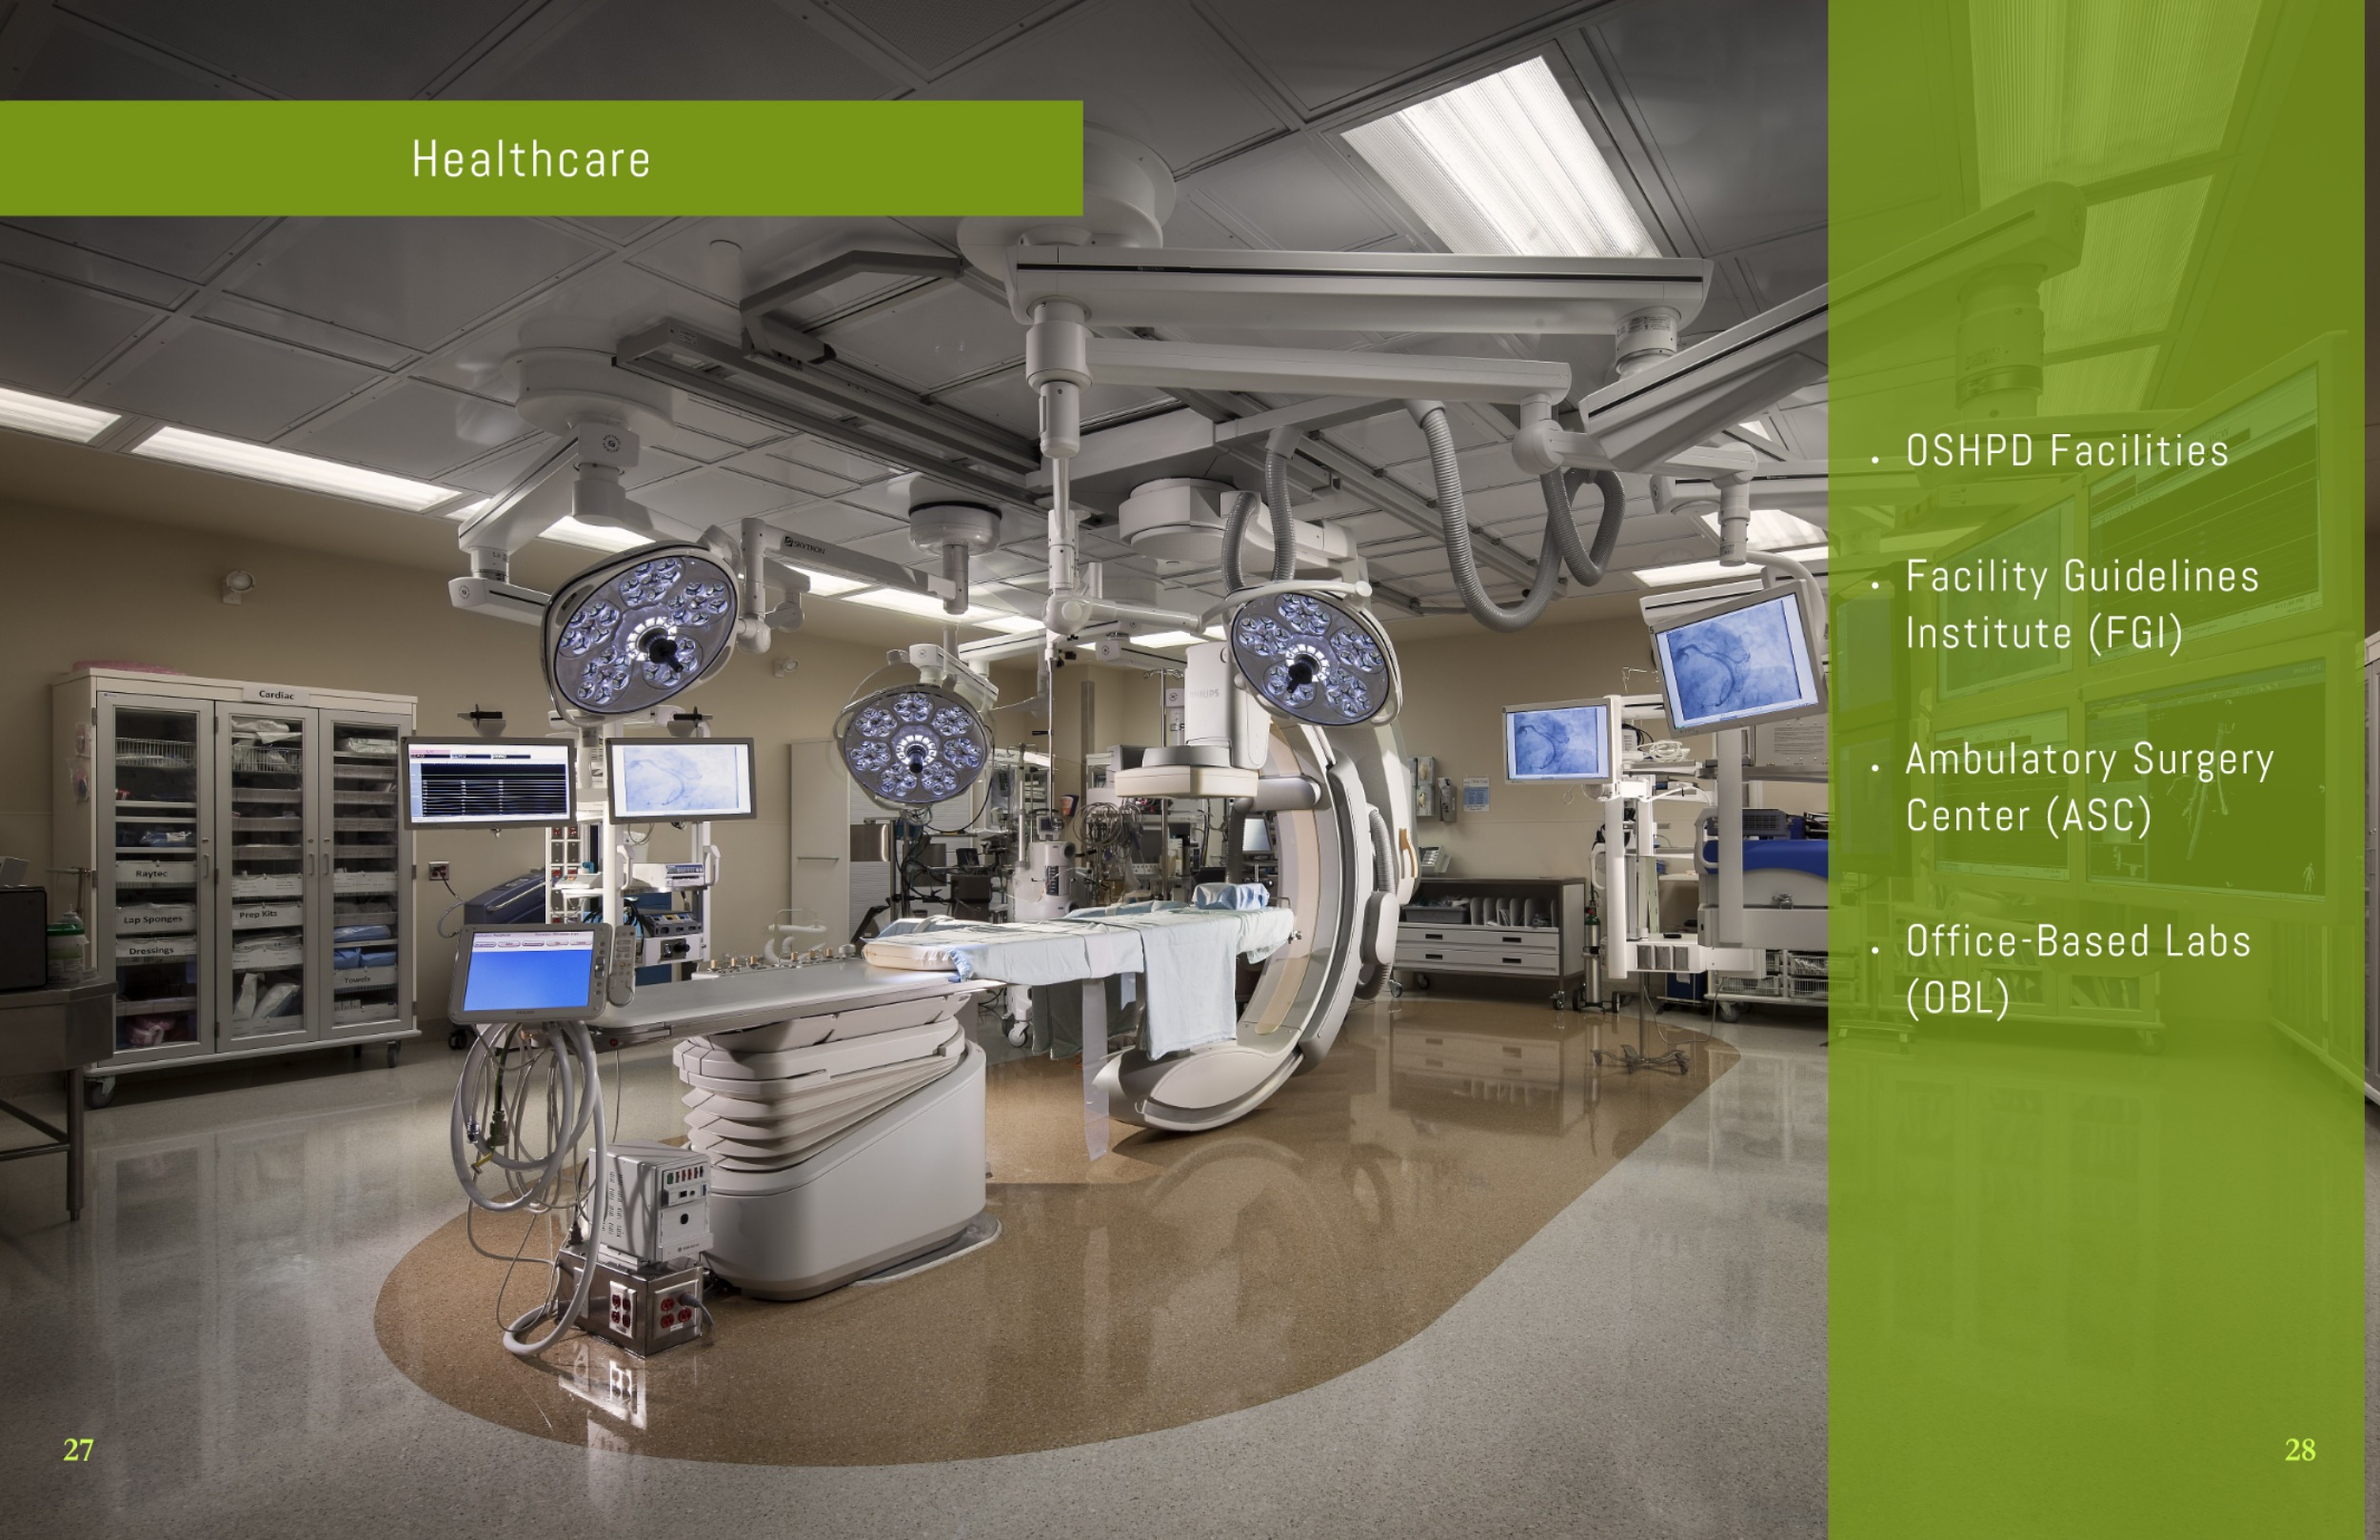 IPS Capabilities Booklet Healthcare spread with services including OSHPD Facilities, Facility Guidelines Institute (FGI), Ambulatory Surgery Center (ASC), and Office-Based Labs (OBL).